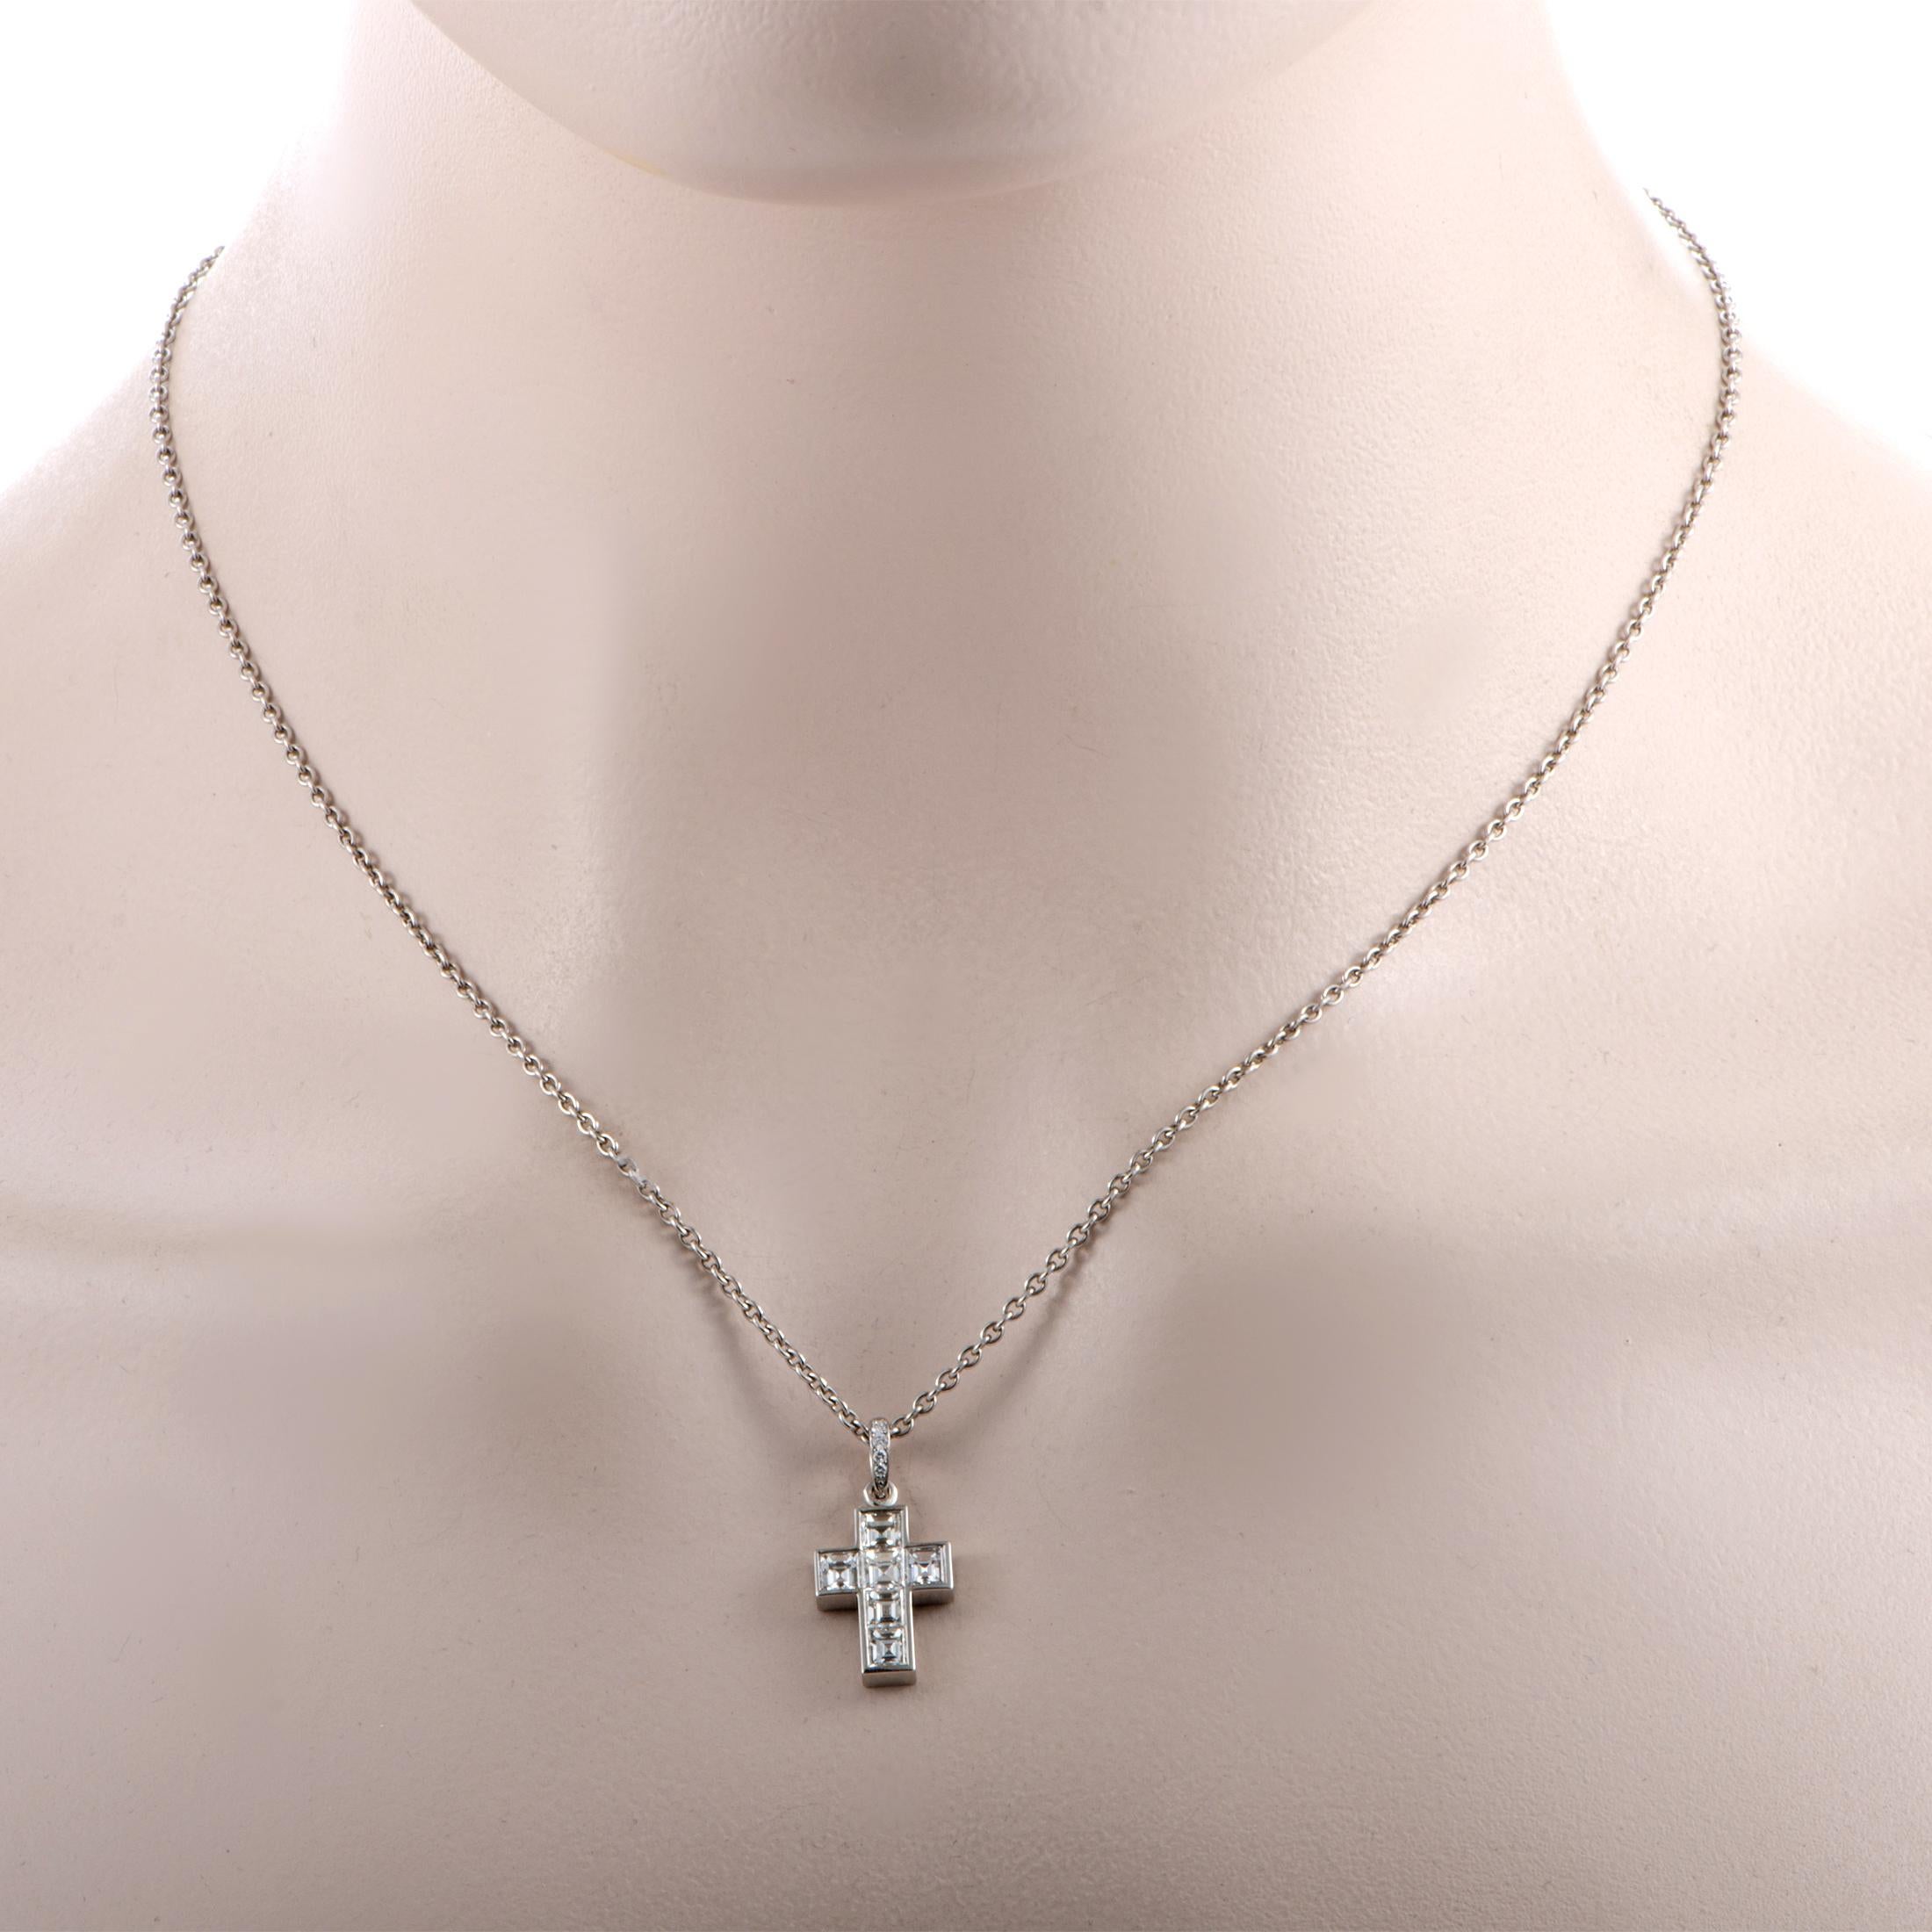 This Cartier necklace is crafted from platinum, featuring an 18” chain with lobster claw closure and a cross pendant that measures 0.88” in length and 0.50” in width. The necklace weighs 9.8 grams and is set with a total of approximately 1.50 carats